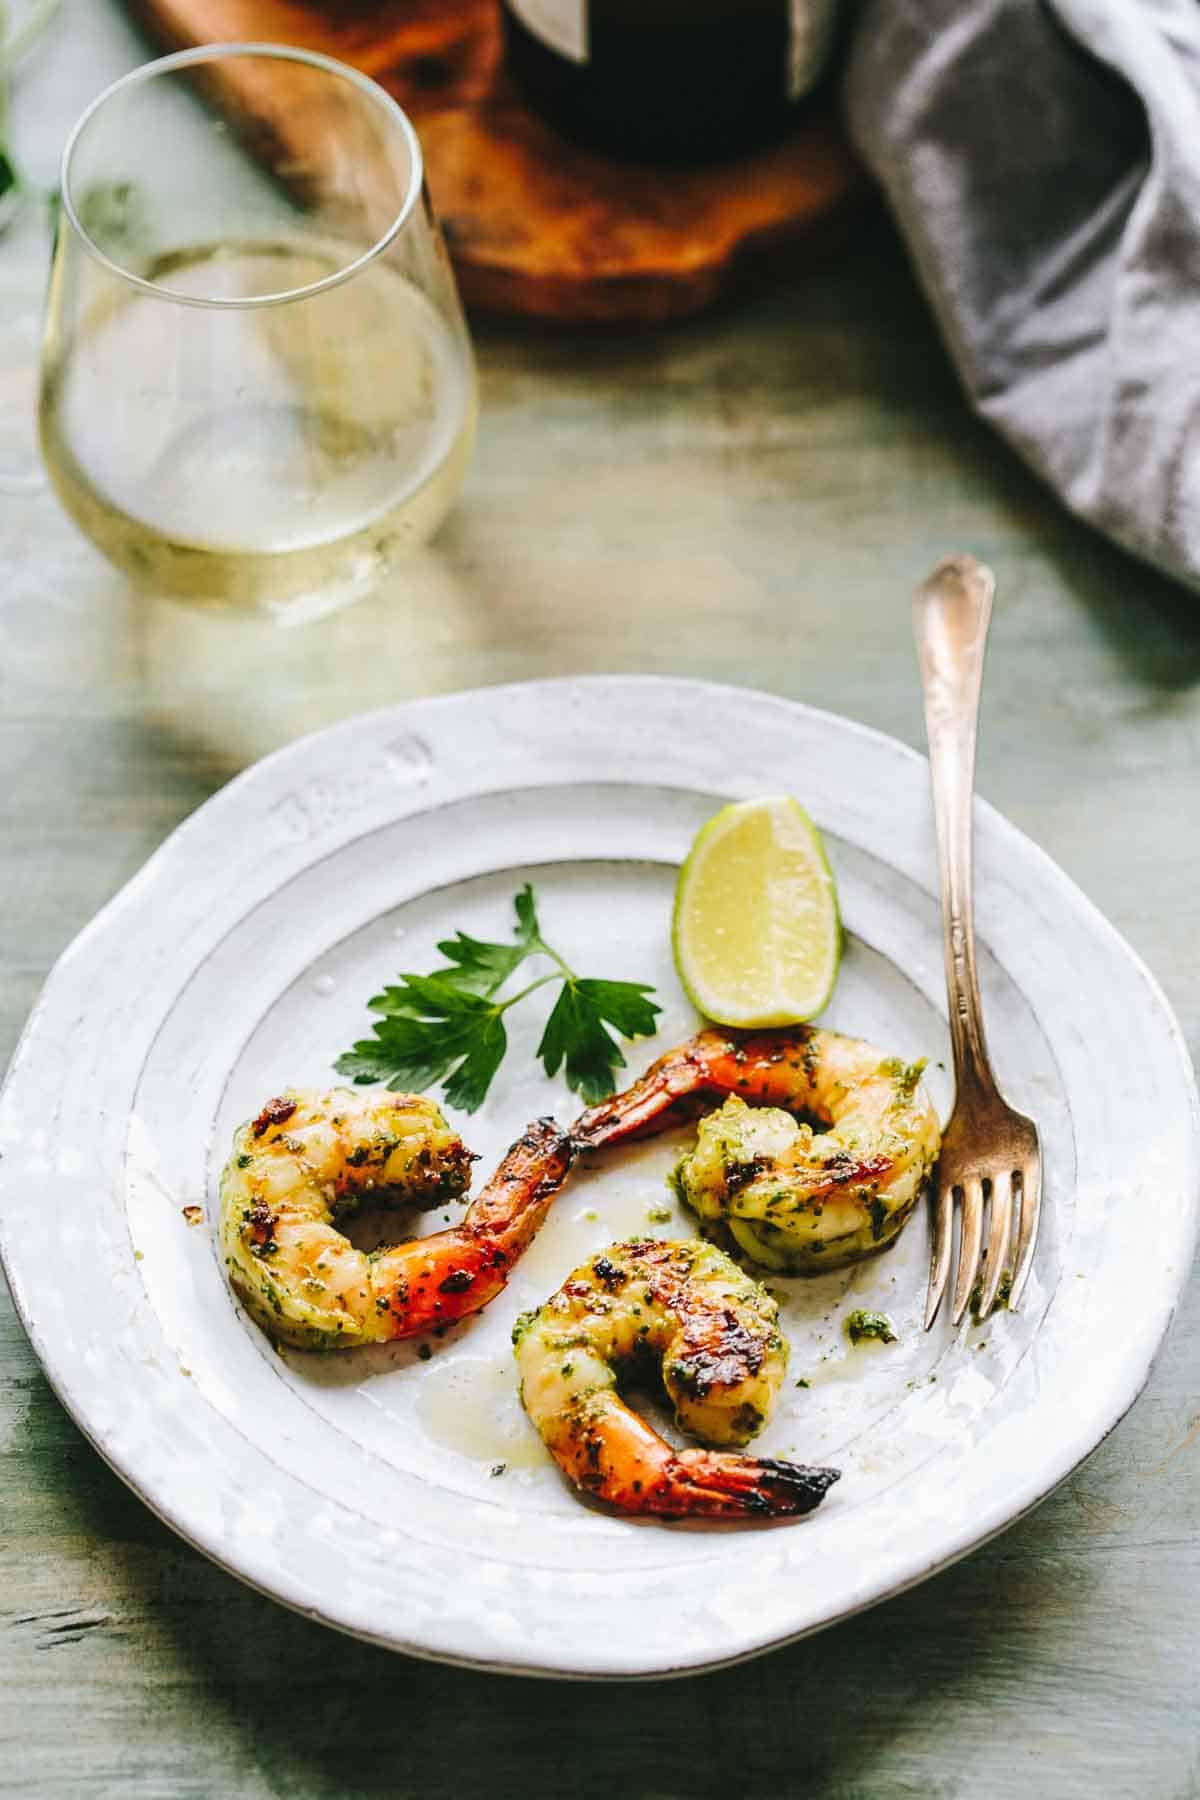 A gray plate with three grilled shrimp and a glass of white wine.